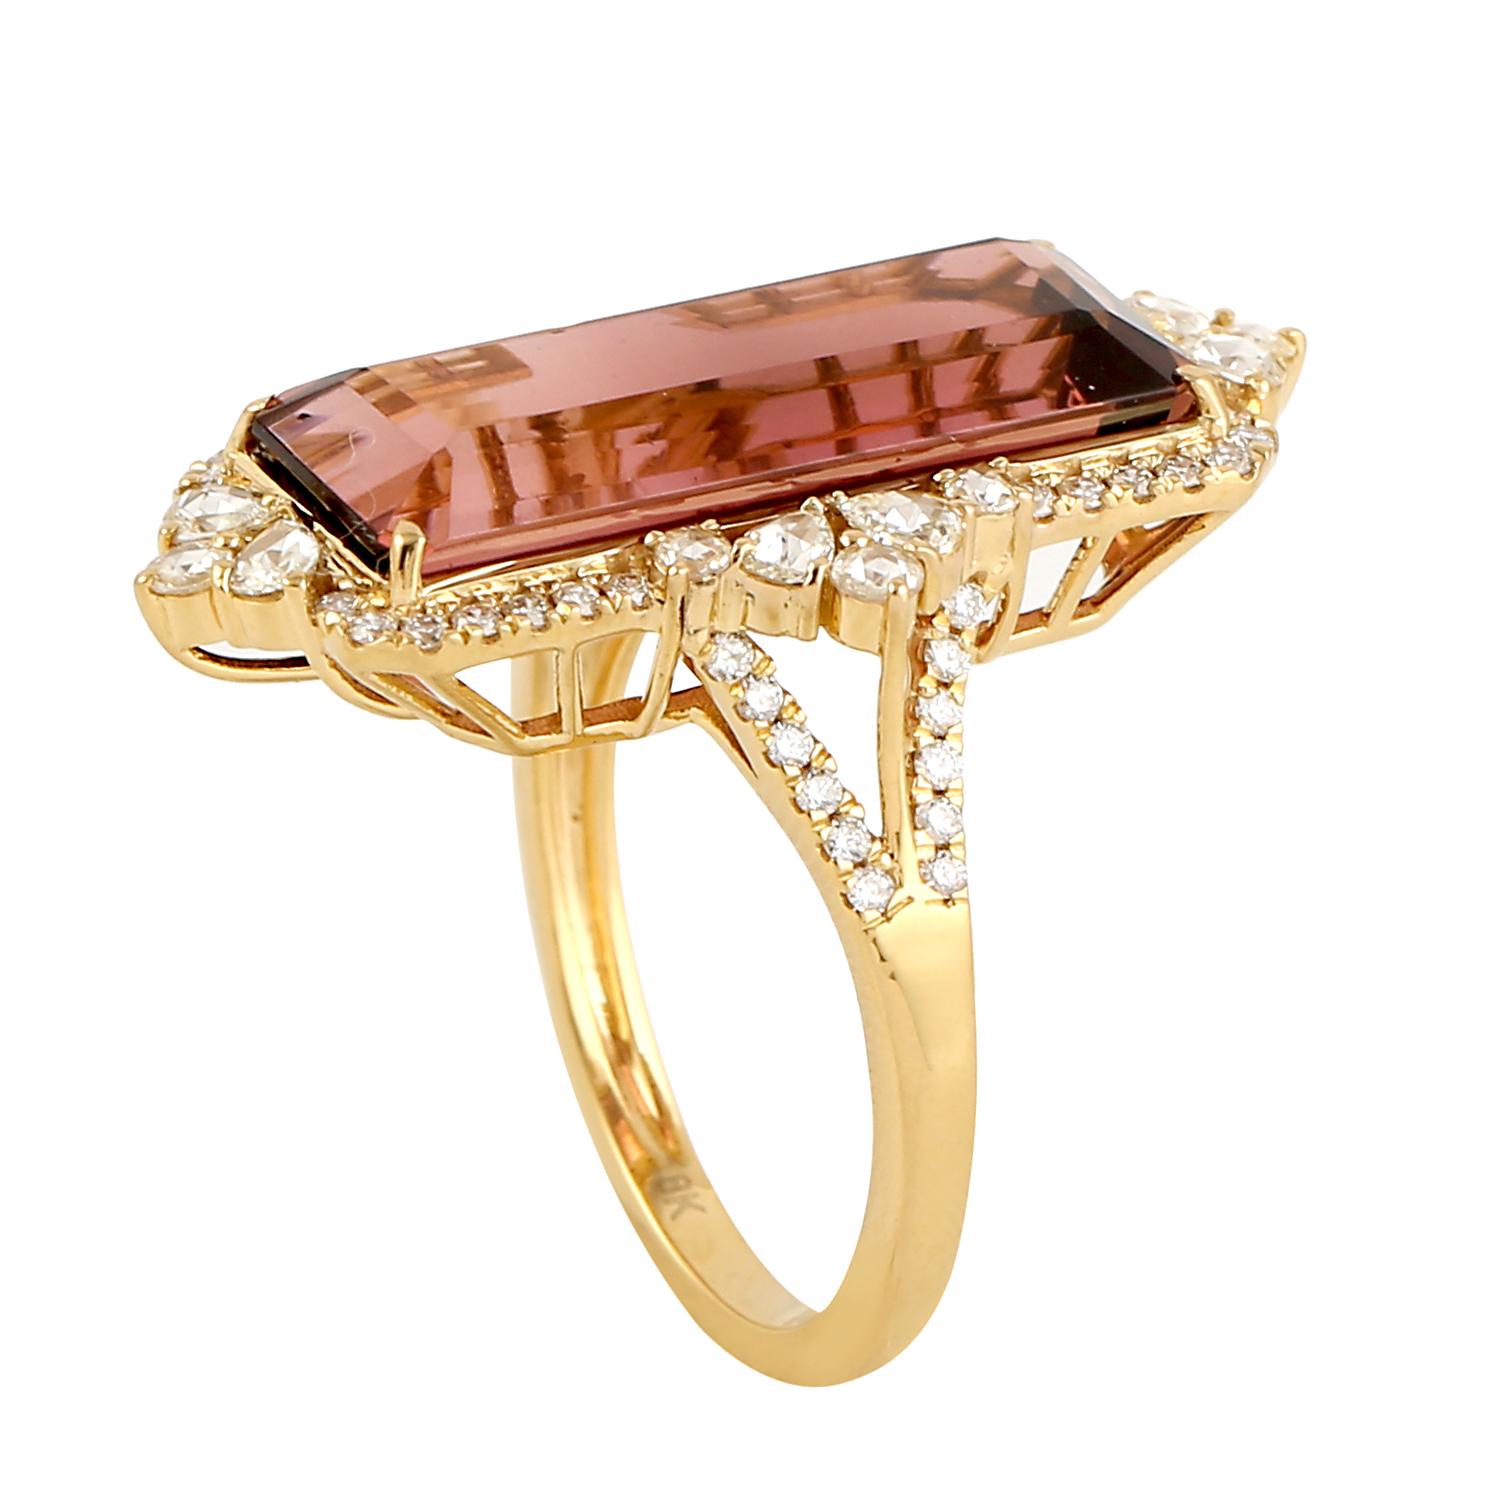 Pink Tourmaline Cocktail Ring Wth Diamonds Made in 18k Yellow Gold In New Condition For Sale In New York, NY